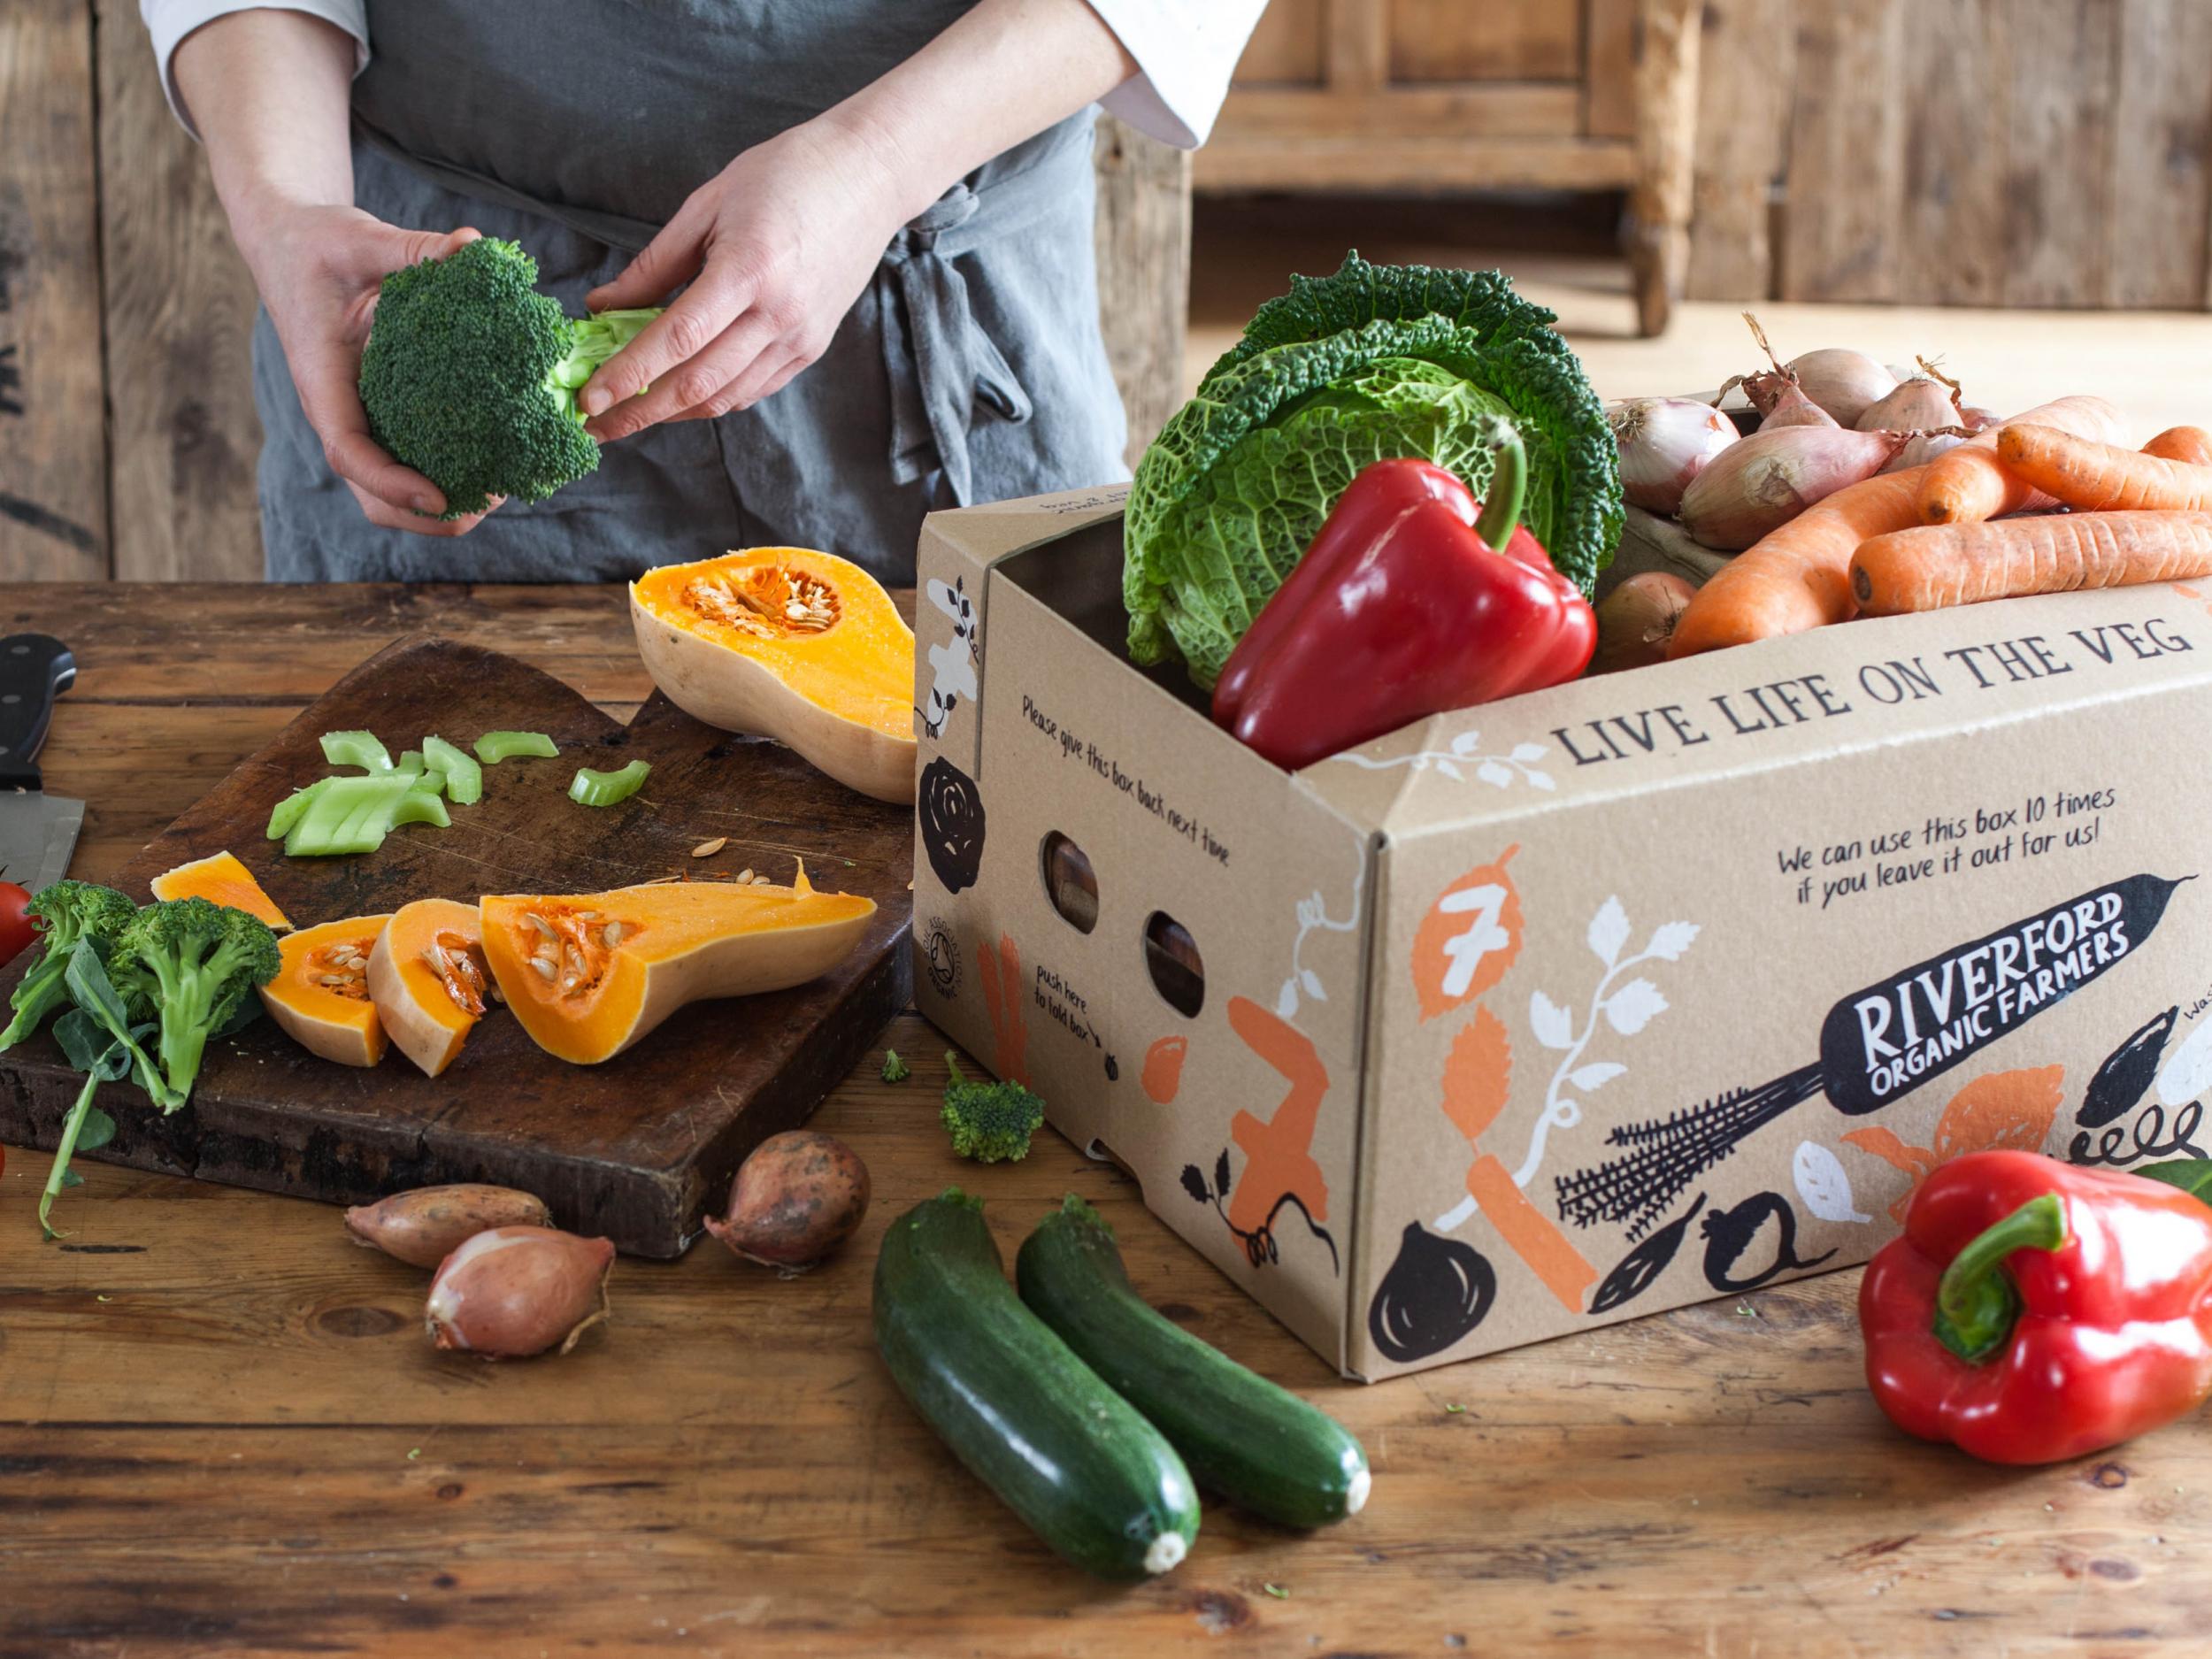 Riverford is an organic farm based in Devon and delivers weekly around the country